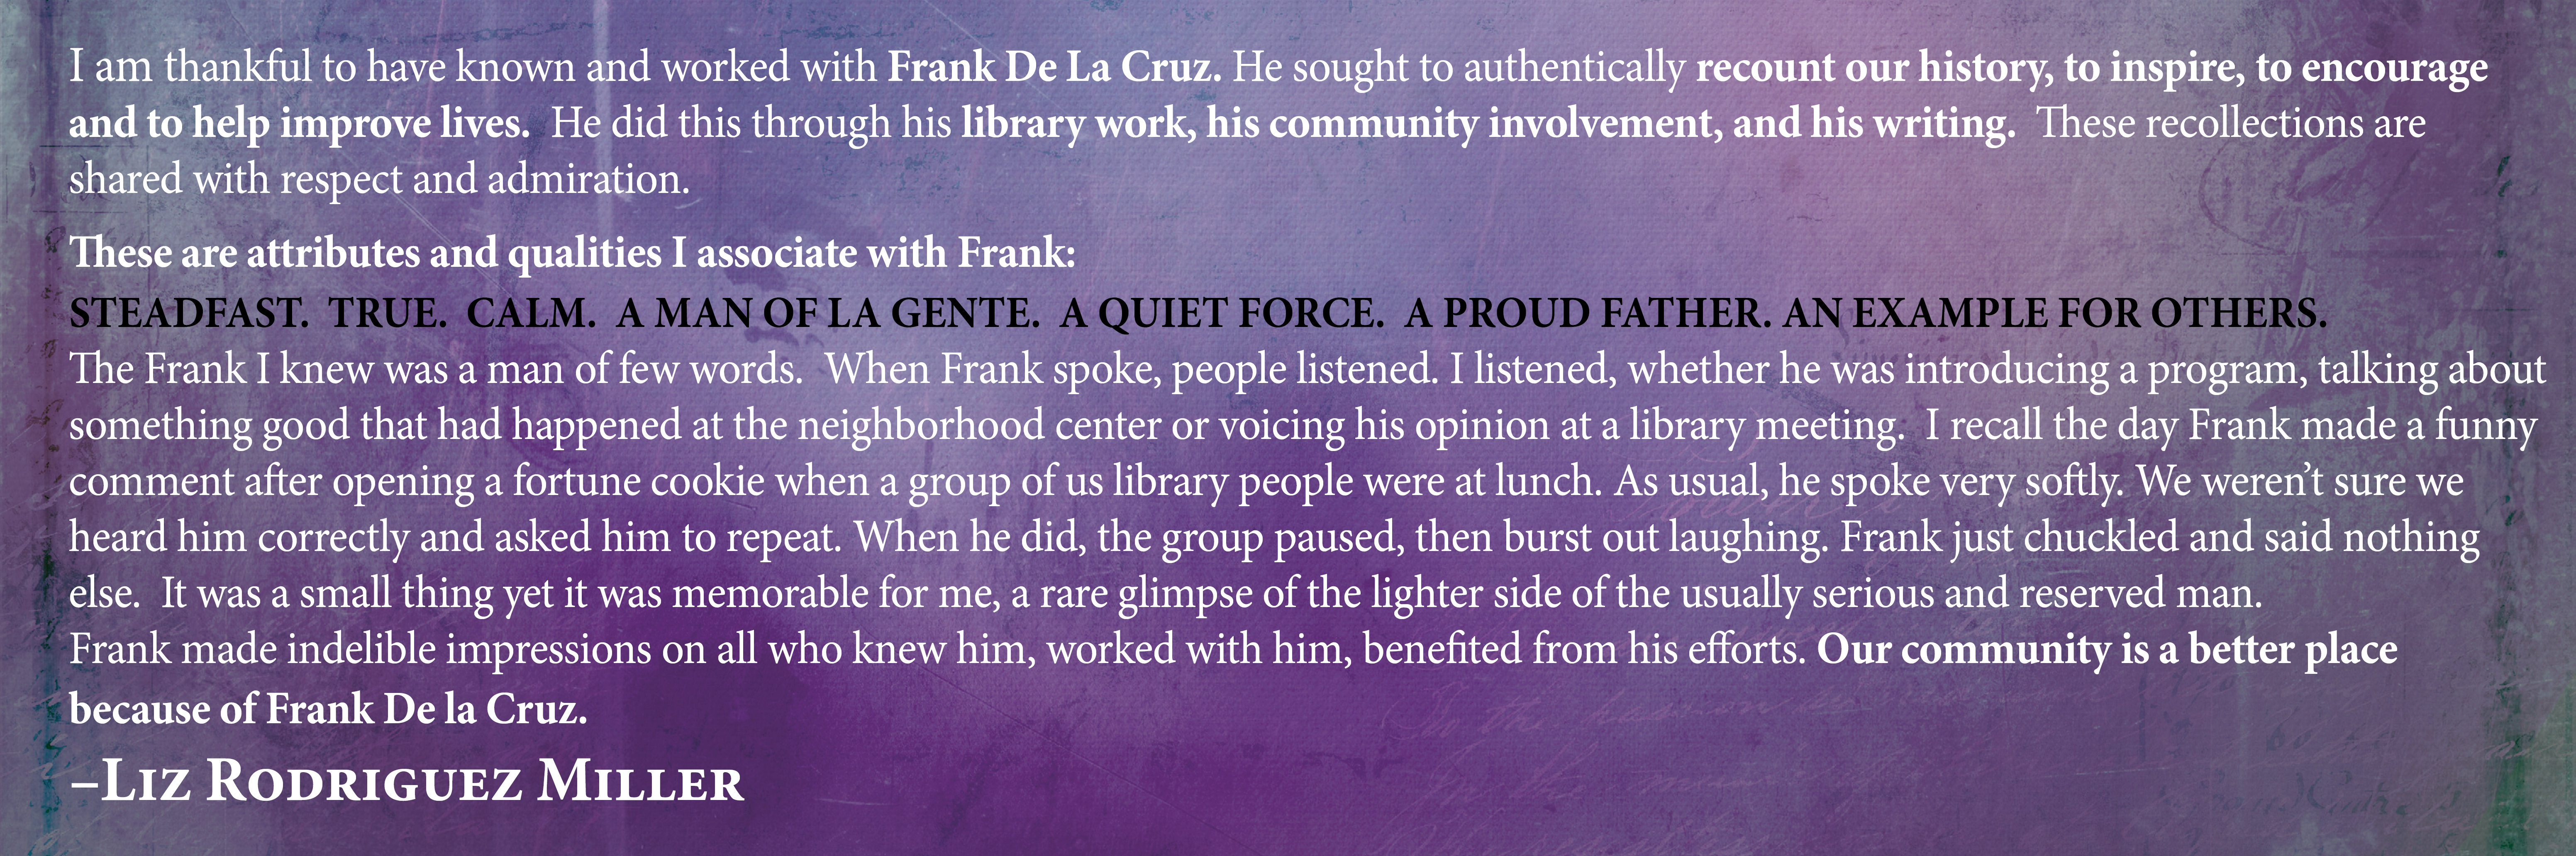 I am thankful to have known and worked with Frank De La Cruz. He sought to authentically recount our history, to inspire, to encourage and to help improve lives. He did this through his library work, his community involvement, and his writing. These recollections are shared with respect and admiration. These are attributes and qualities I associate with Frank: Steadfast. True. Calm. A man of la gente. A quiet force. A proud father. An example for others. The Frank I knew was a man of few words. When Frank spoke, people listened. I listened, whether he was introducing a program, talking about something good that had happened at the neighborhood center or voicing his opinion at a library meeting. I recall the day Frank made a funny comment after opening a fortune cookie when a group of us library people were at lunch. As usual, he spoke very softly. We weren’t sure we heard him correctly and asked him to repeat. When he did, the group paused, then burst out laughing. Frank just chuckled and said nothing else. It was a small thing yet it was memorable for me, a rare glimpse of the lighter side of the usually serious and reserved man. Frank made indelible impressions on all who knew him, worked with him, benefited from his efforts. Our community is a better place because of Frank De la Cruz. Liz Rodriguez Miller